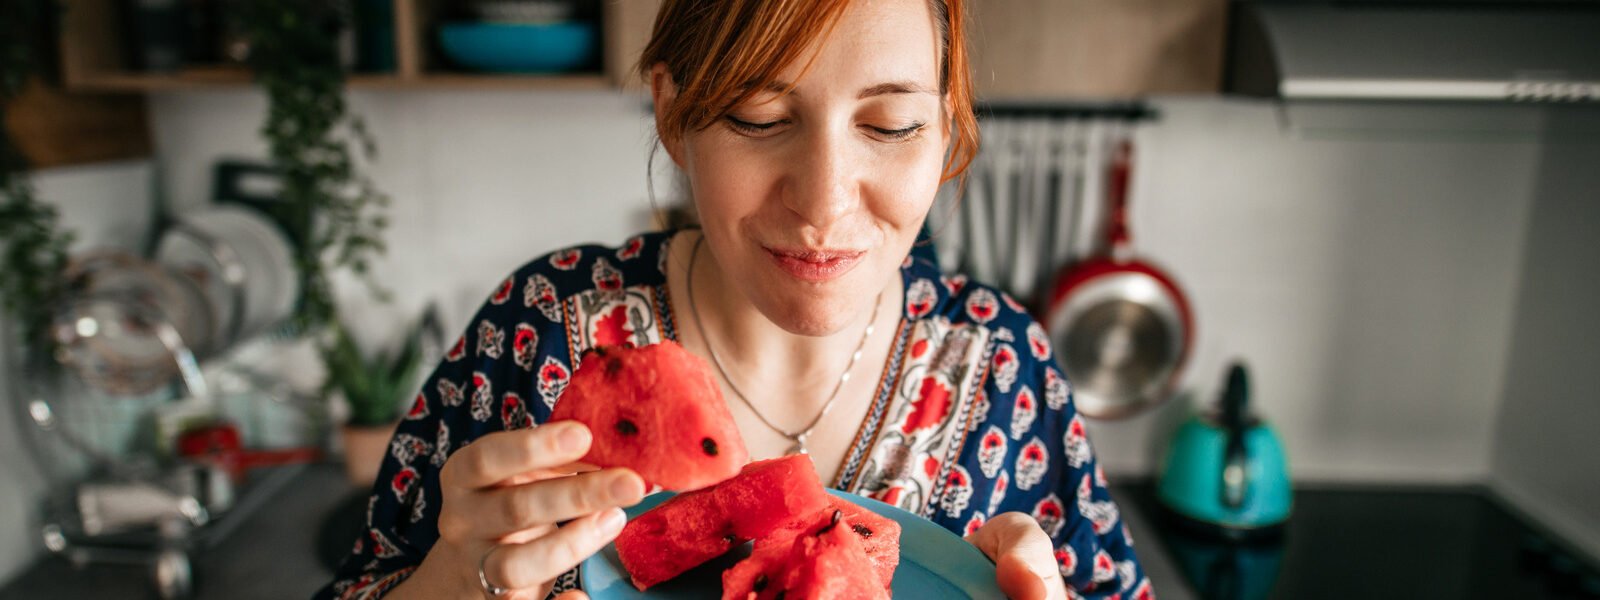 Avoid Eating Watermelon If You Have This Medical Condition - Health Digest